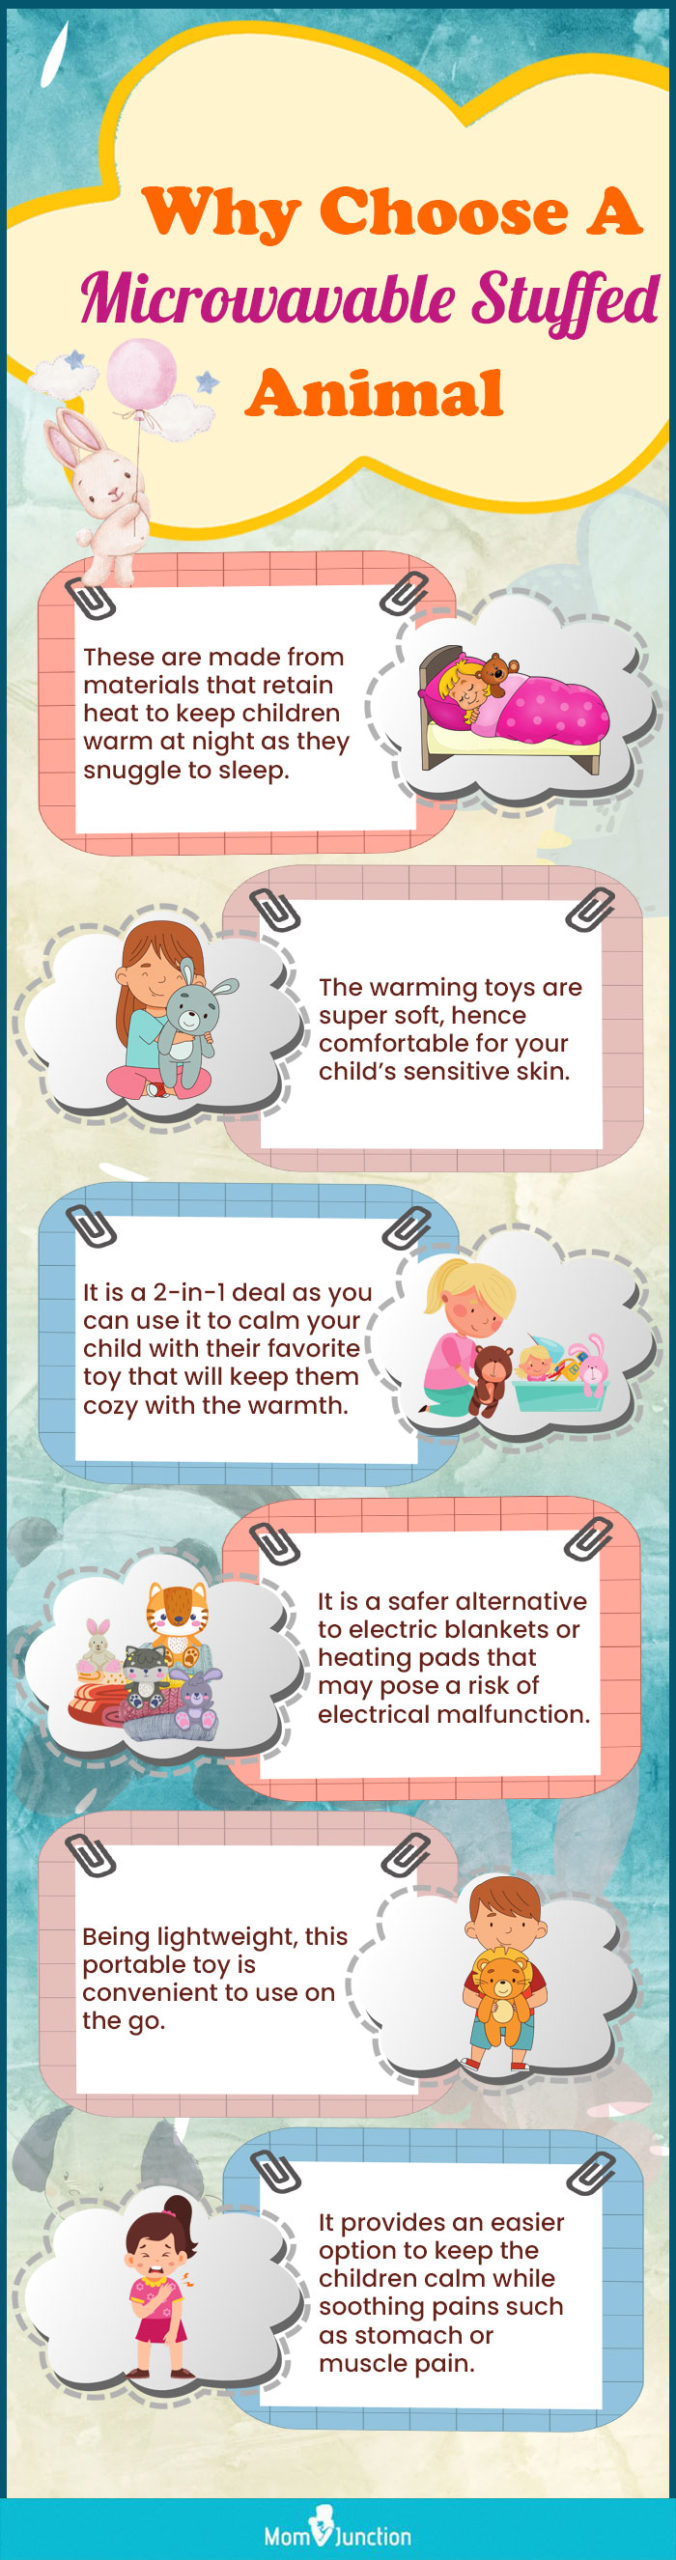 Why-Choose-A-Microwavable-Stuffed-Animal (infographic)